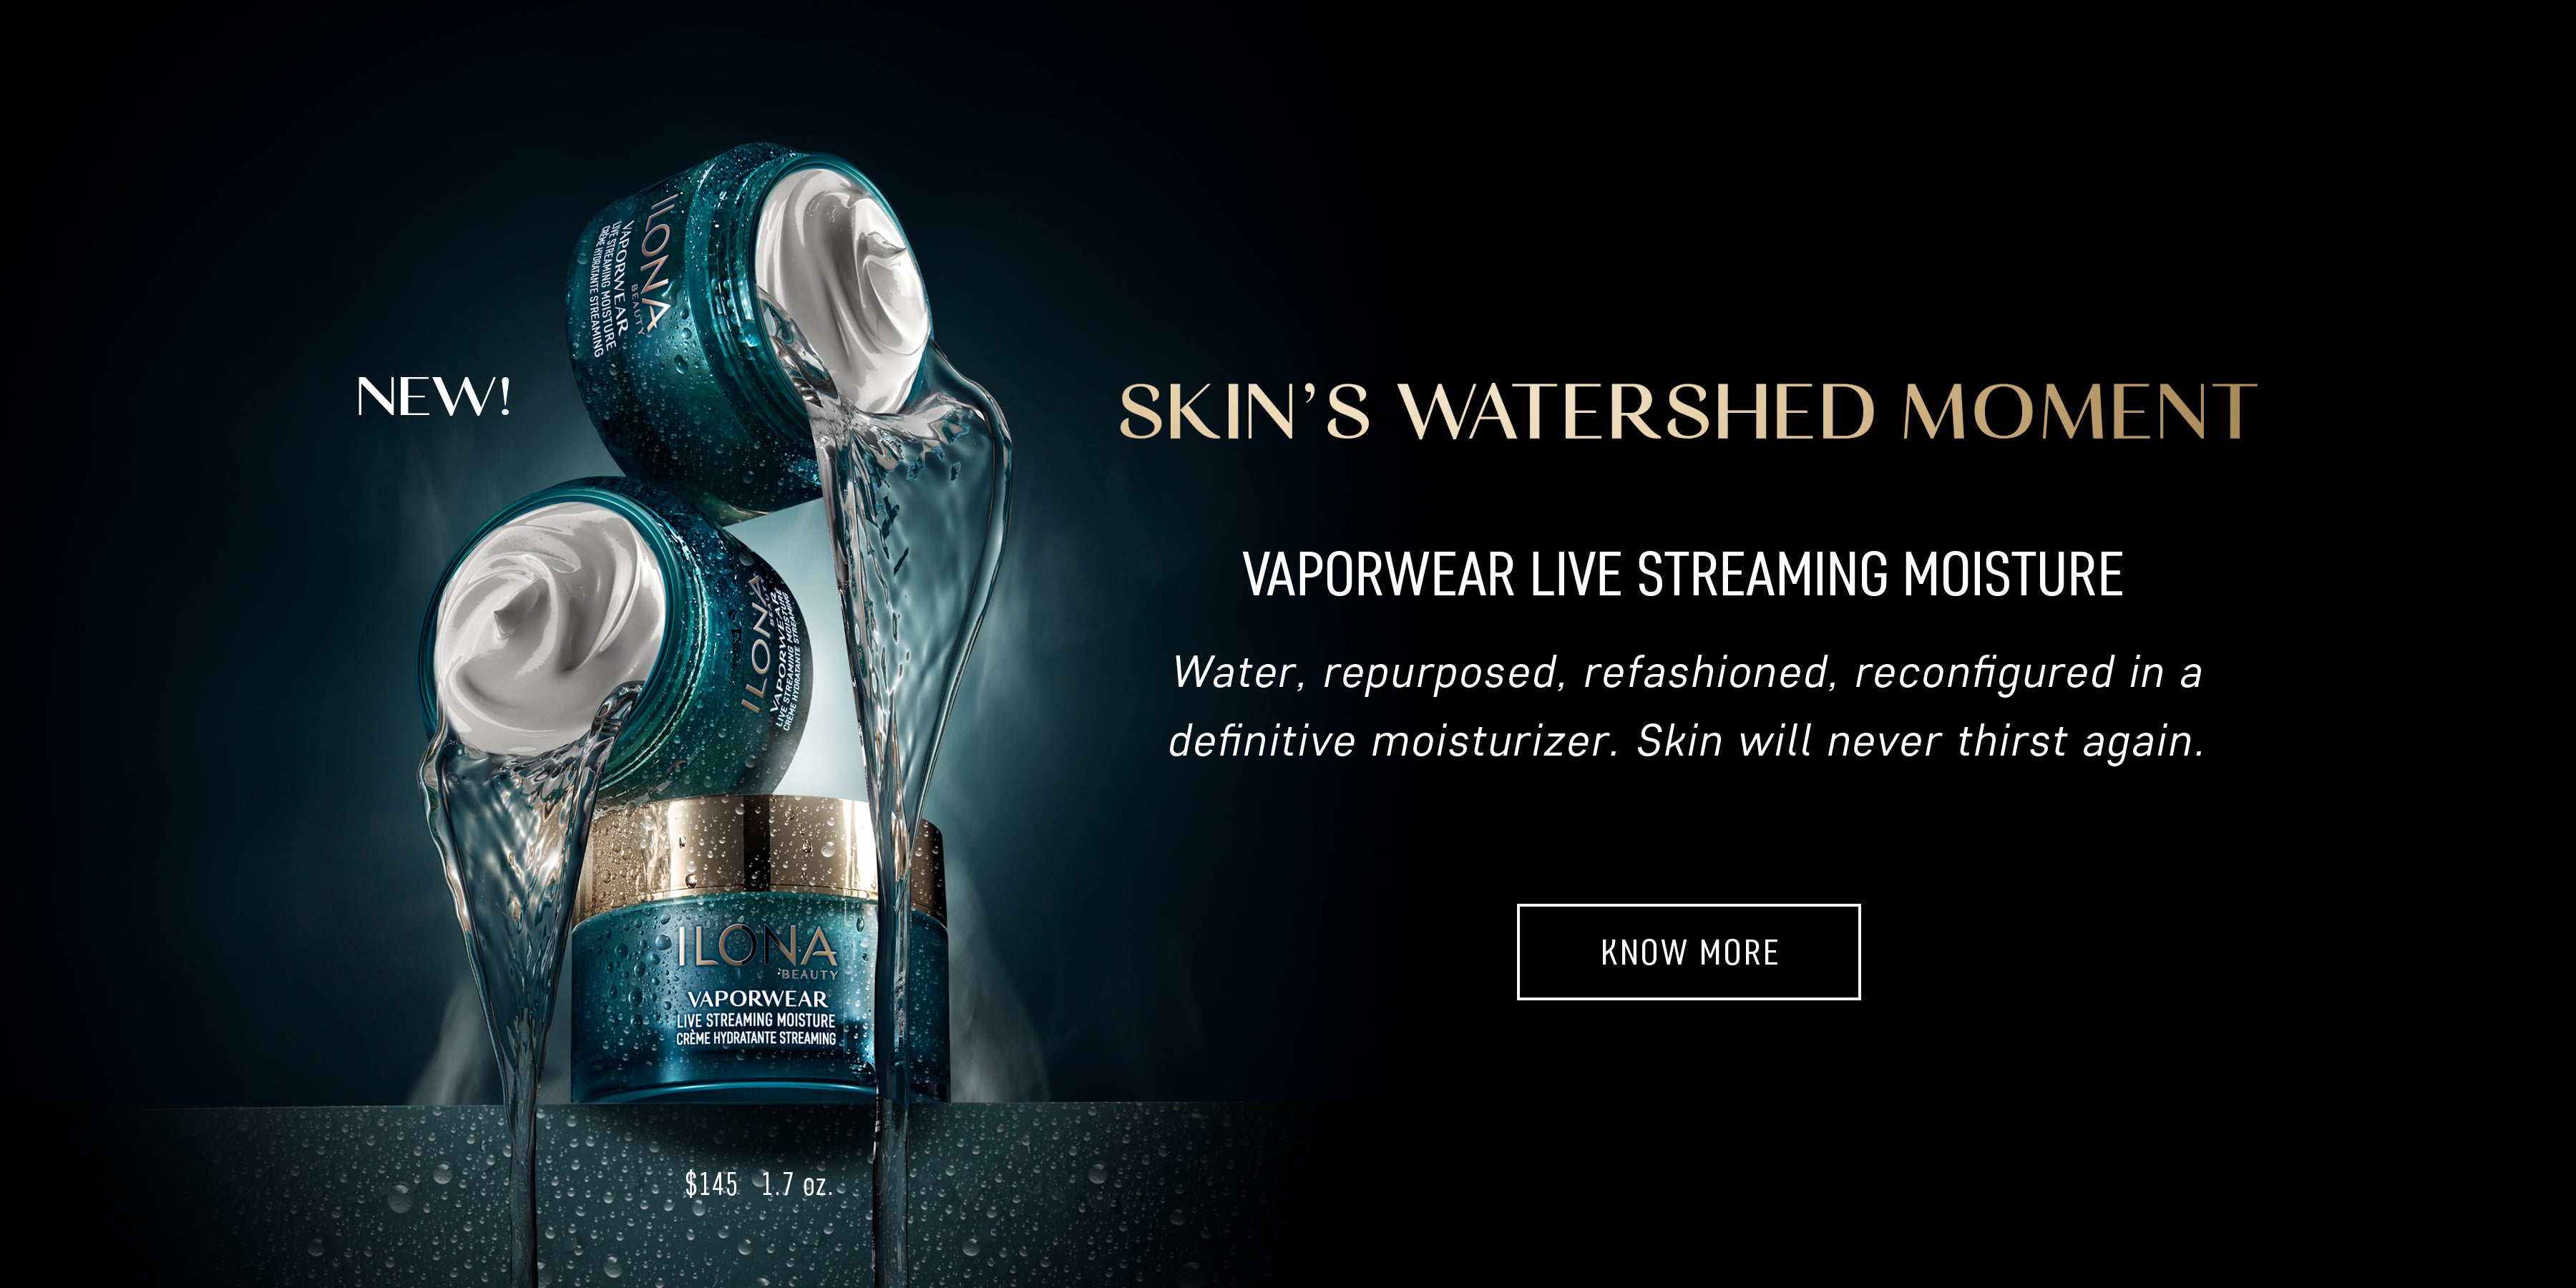 SKIN's WATERSHED MOMENT